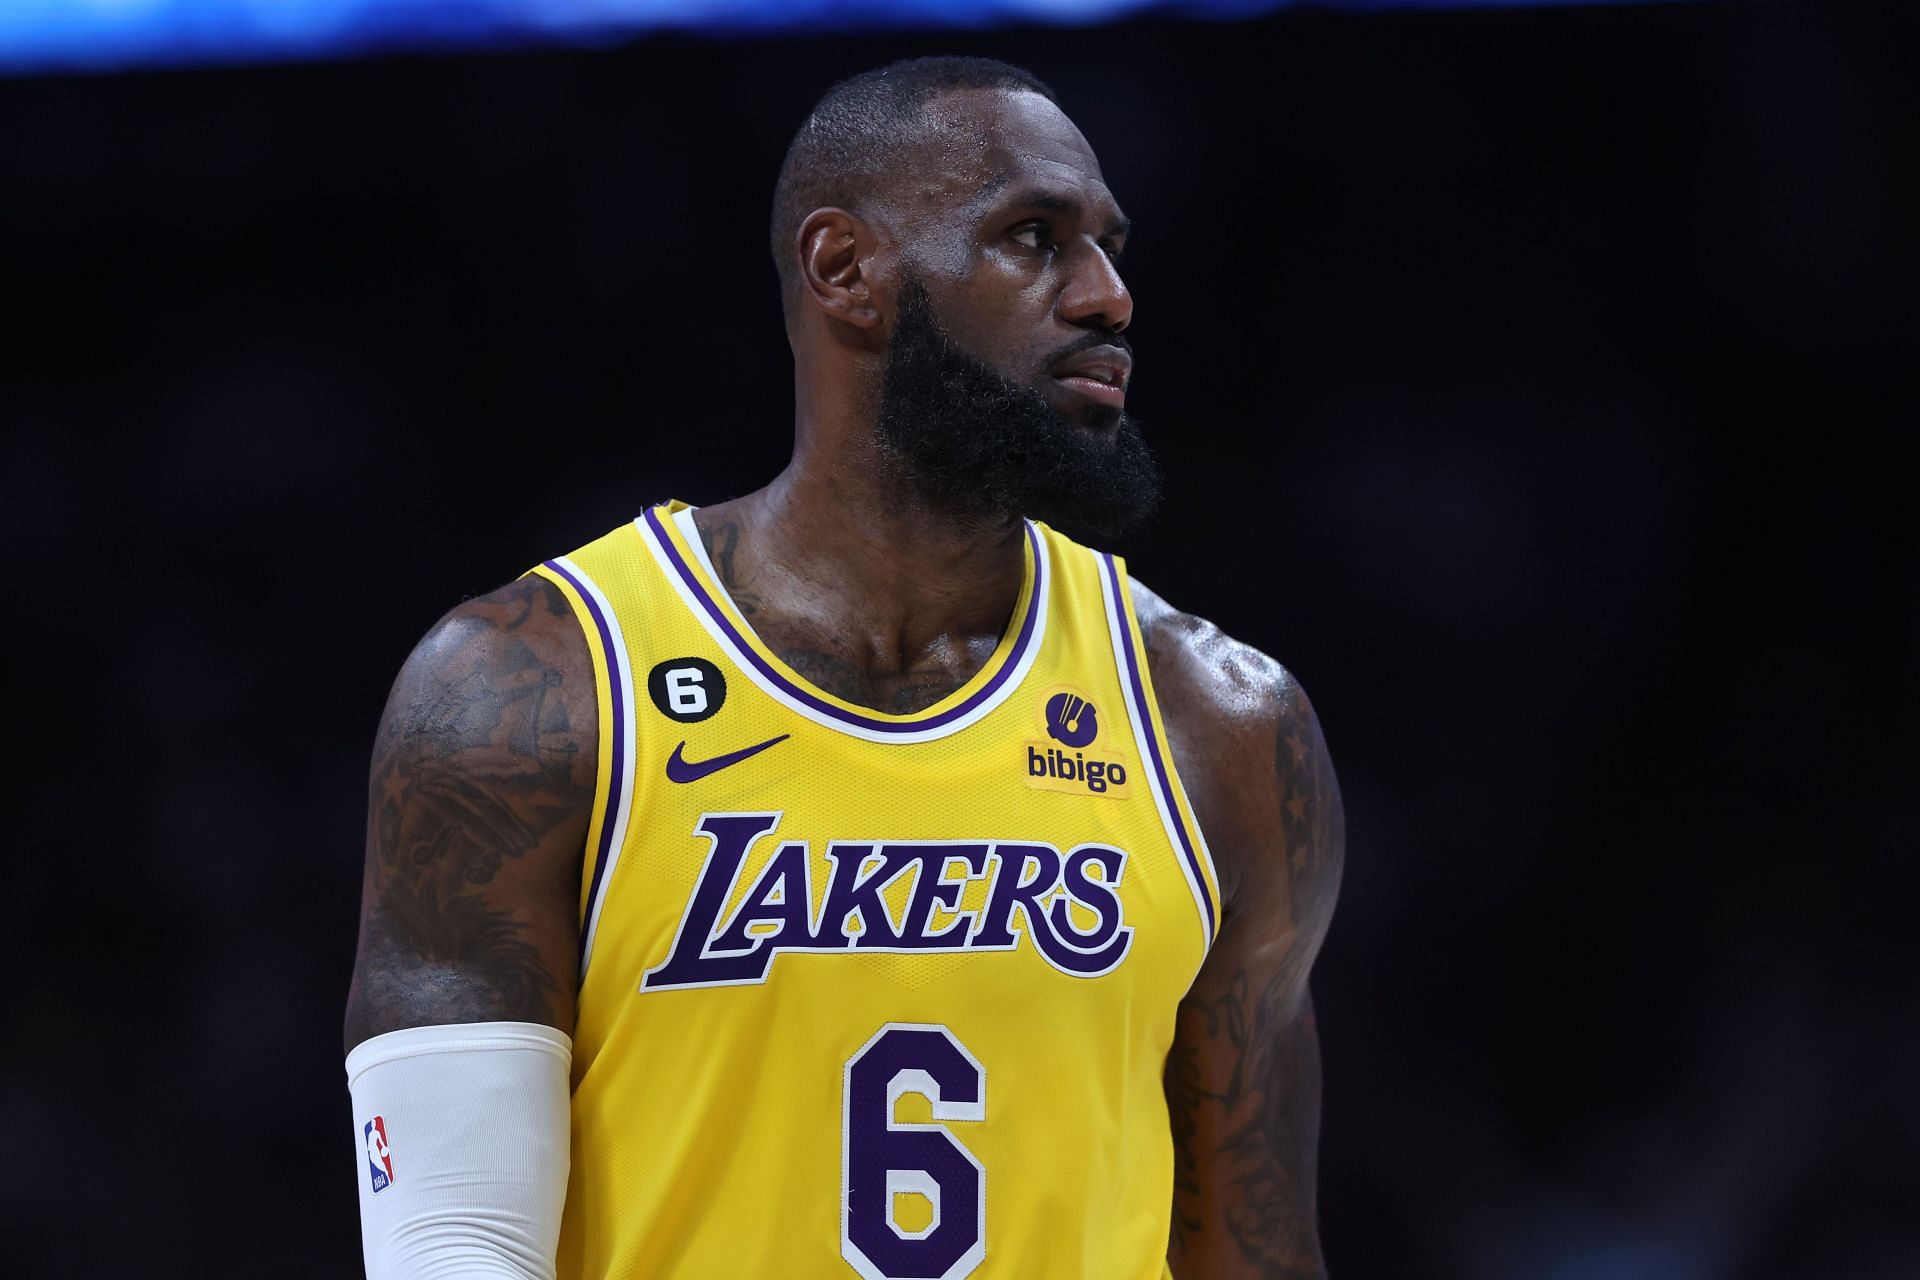 LeBron James will turn 39 years old in December